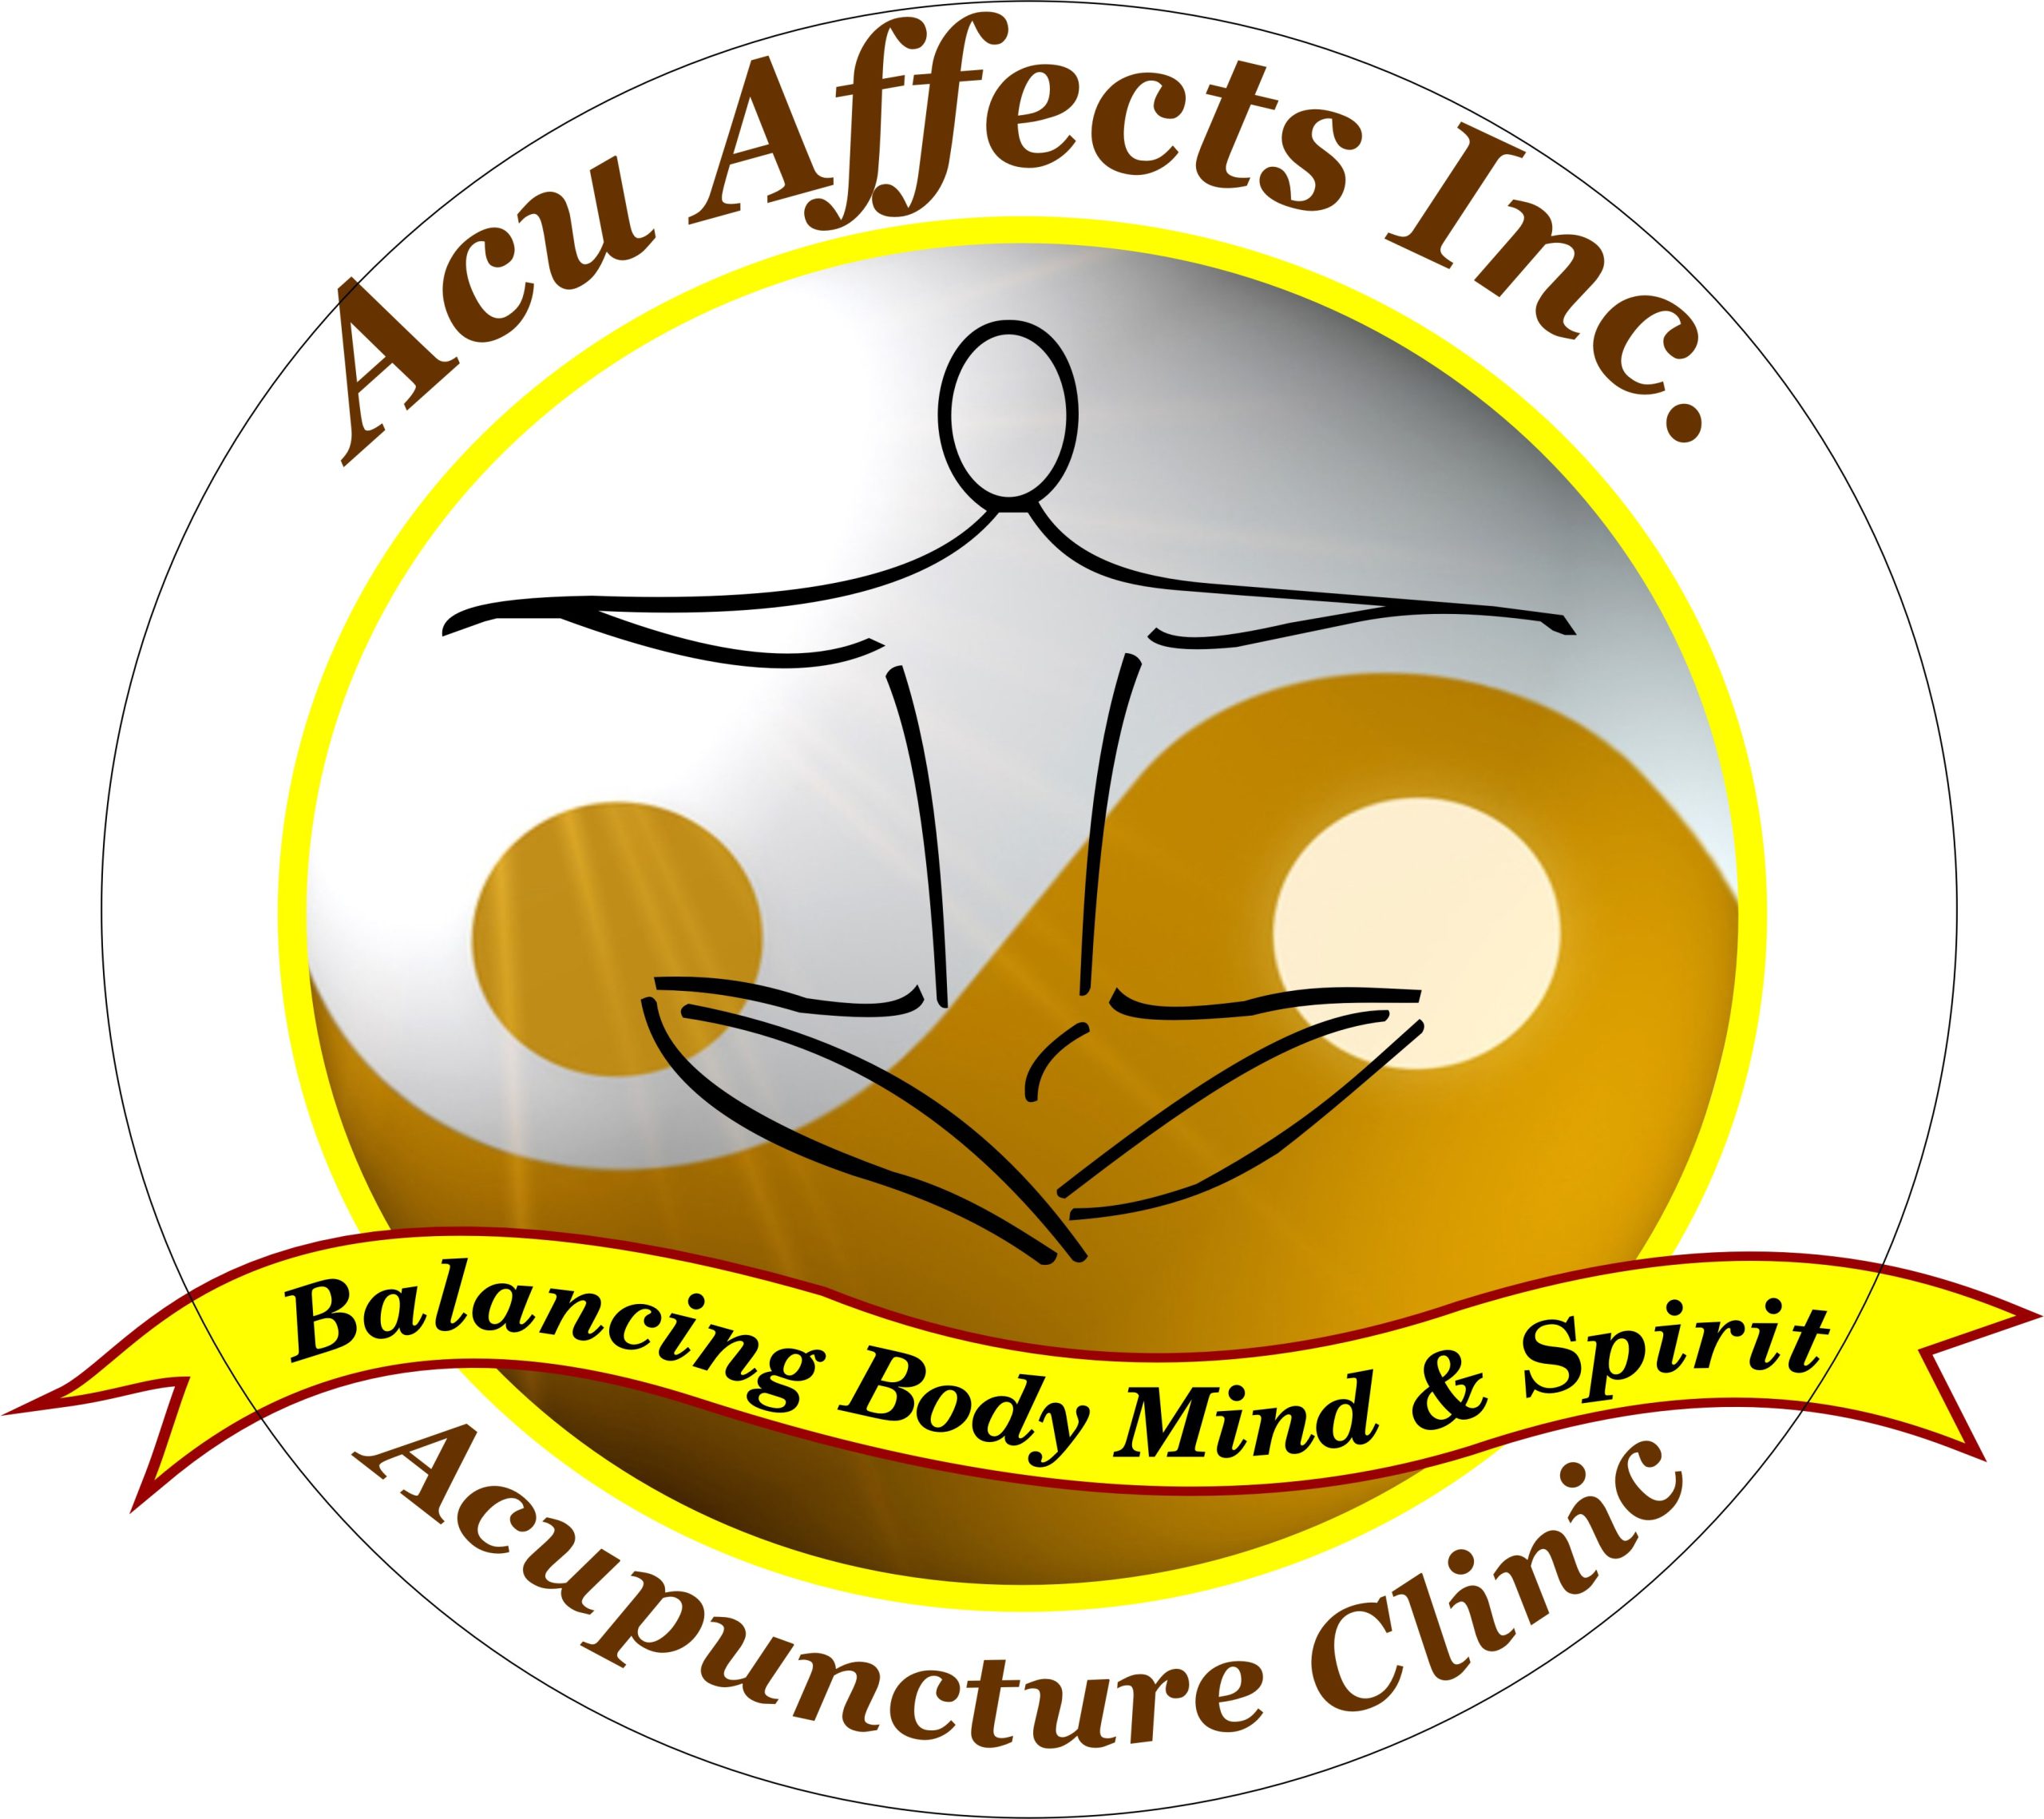 Acu Affectects Inc. Acupuncture, Naturopath, Reflexology, and Laser Therapy Clinic.